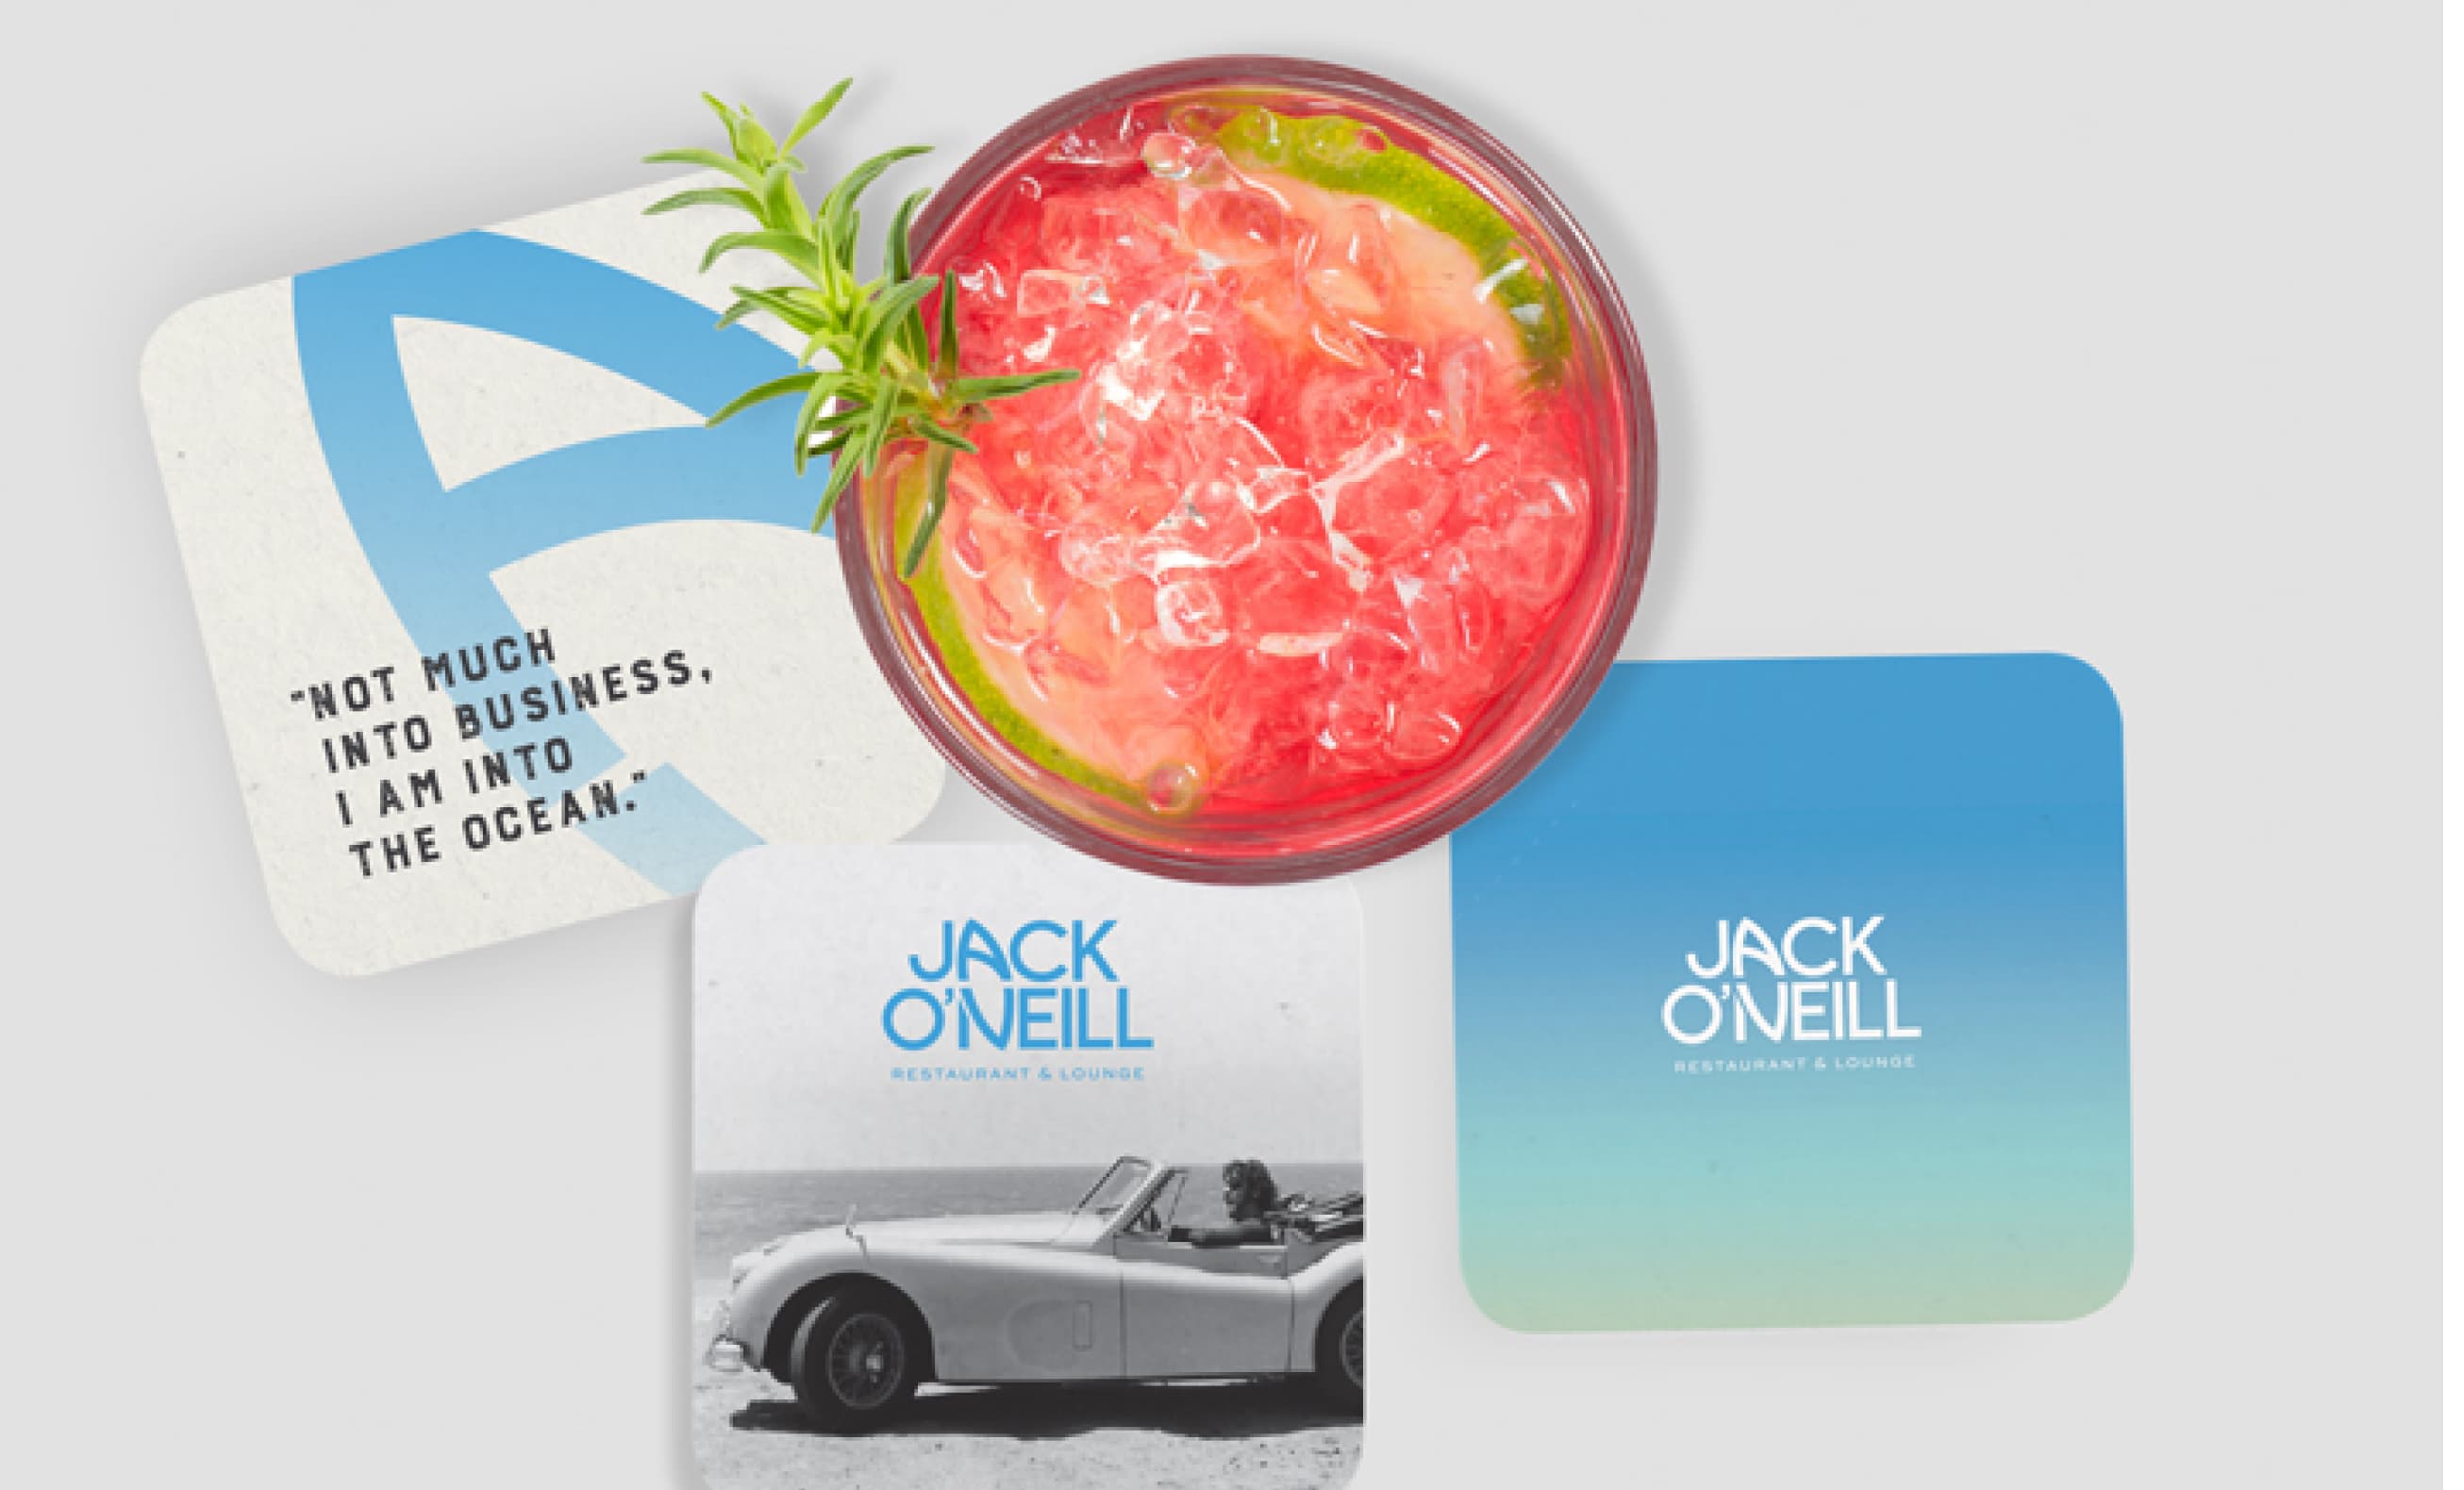 A beverage on a coaster with a quote saying 'NOT MUCH INTO BUSINESS, I AM INTO THE OCEAN.' beside two coasters with branding for Jack O'Neill Restaurant & Lounge and a vintage image of a convertible car on the beach.